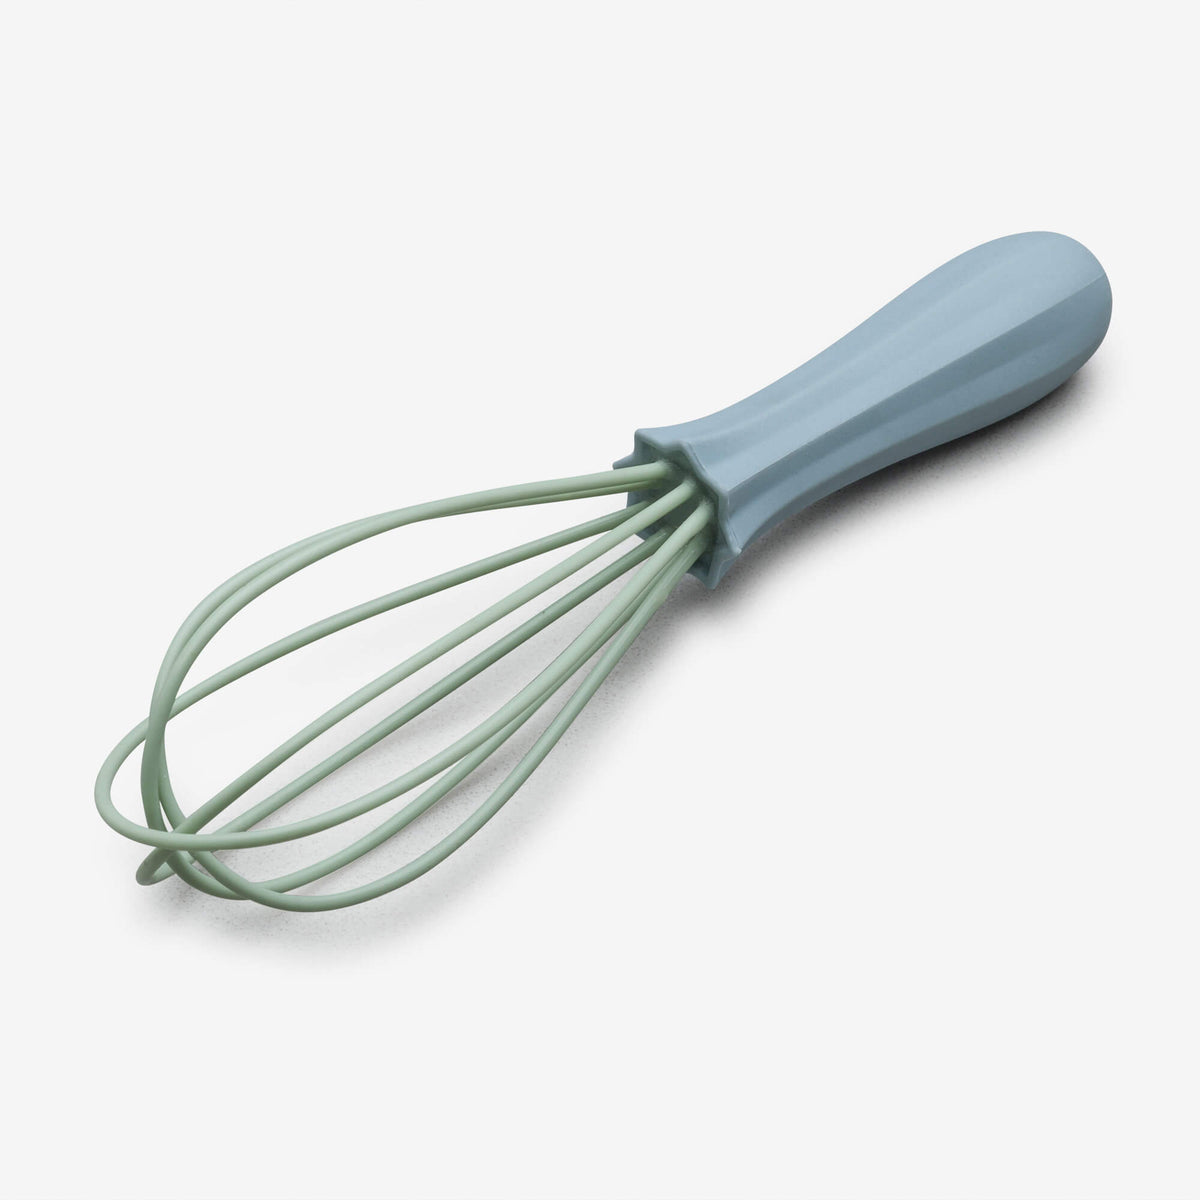 Mini Silicone Whisks with Stainless Steel Handles,Small Whisk for  Eggs,Cheese,Coffee,Stainless Steel Kitchen Whisks and Balloon Egg Whisk 